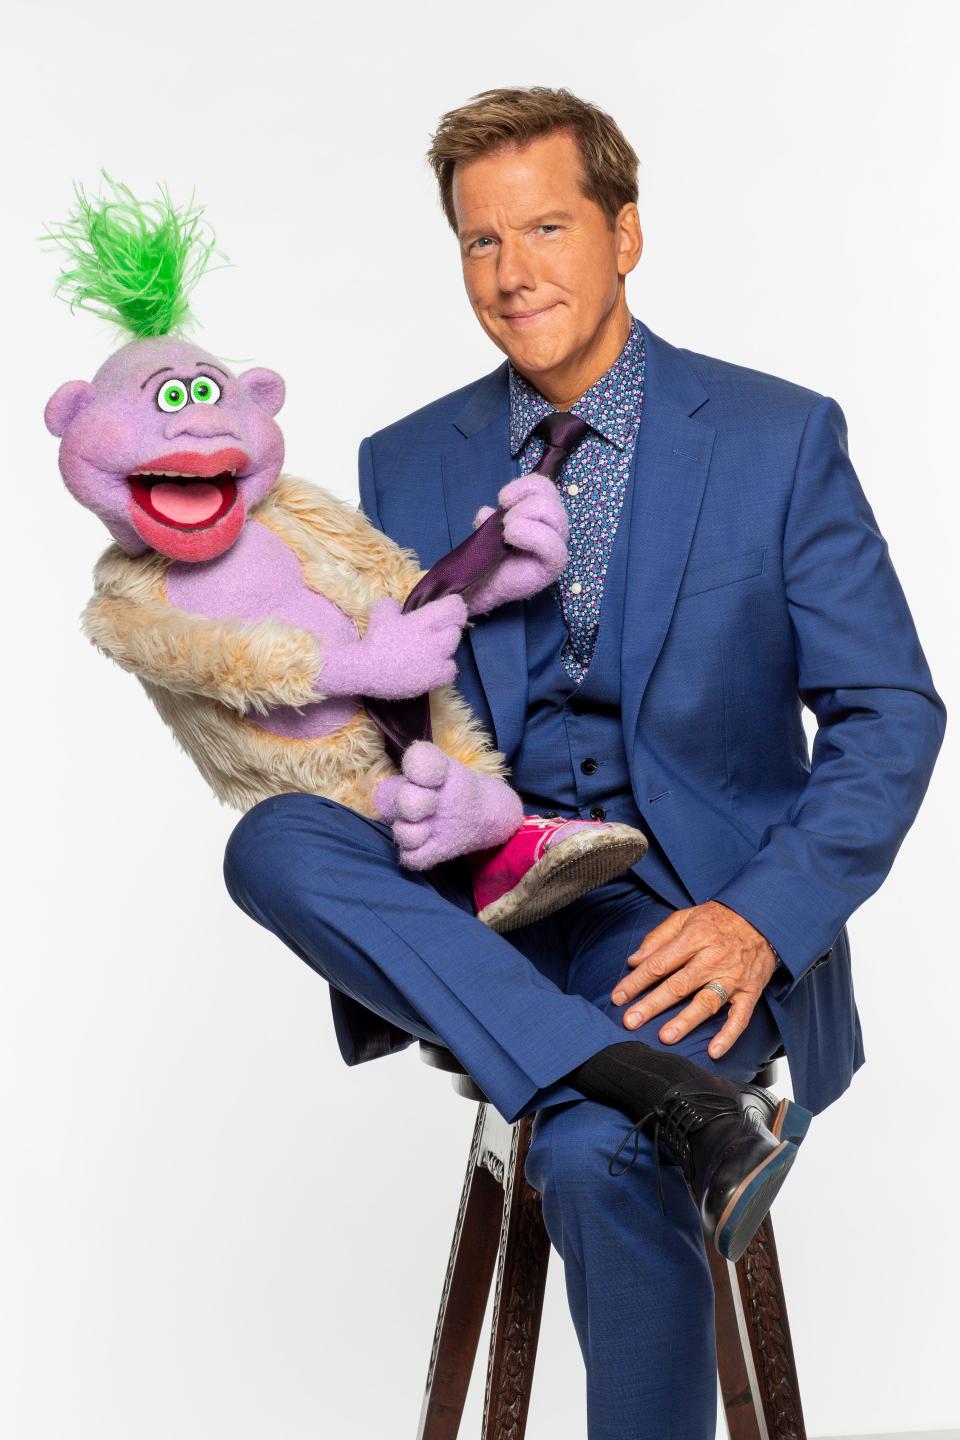 Comedian-ventriloquist Jeff Dunham with the pesky but lovable Peanut.